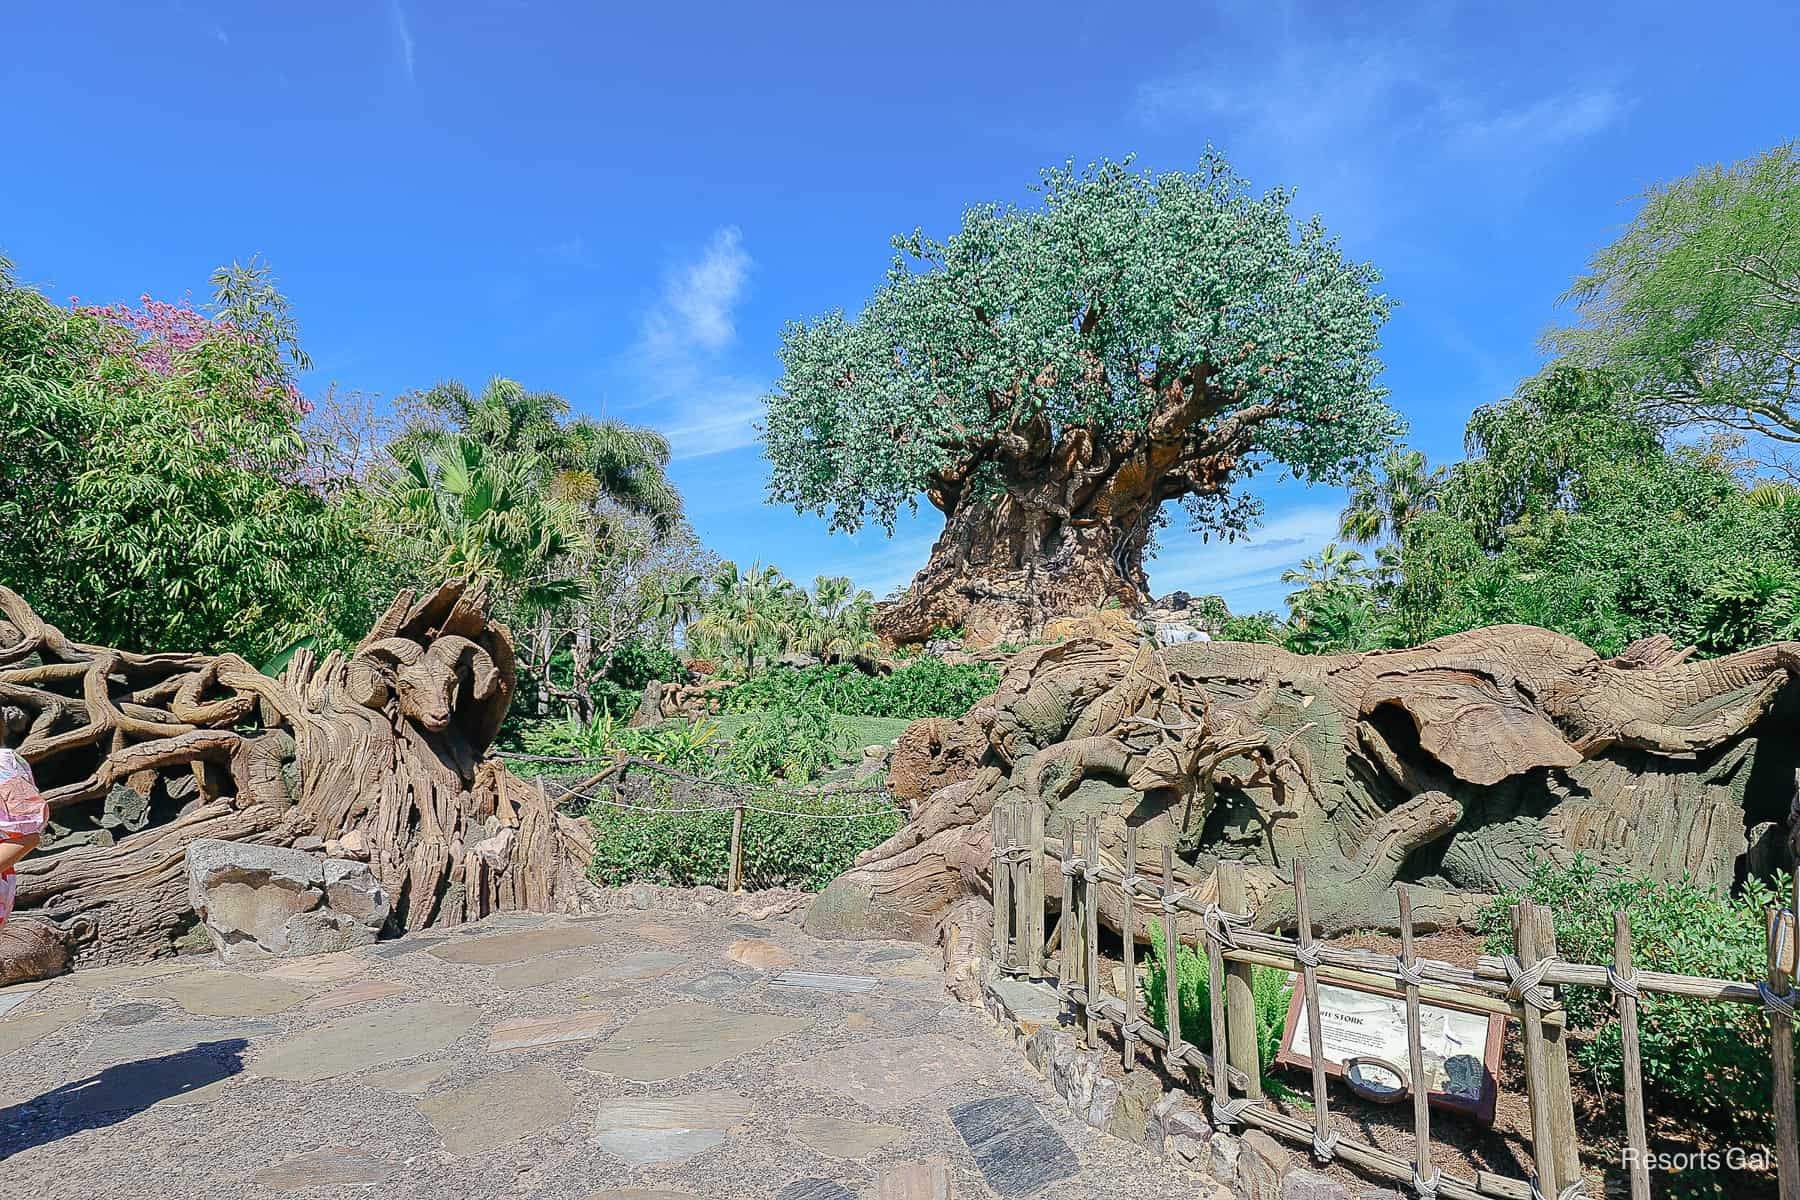 The Tree of Life as seen from the front viewing area of the park. 